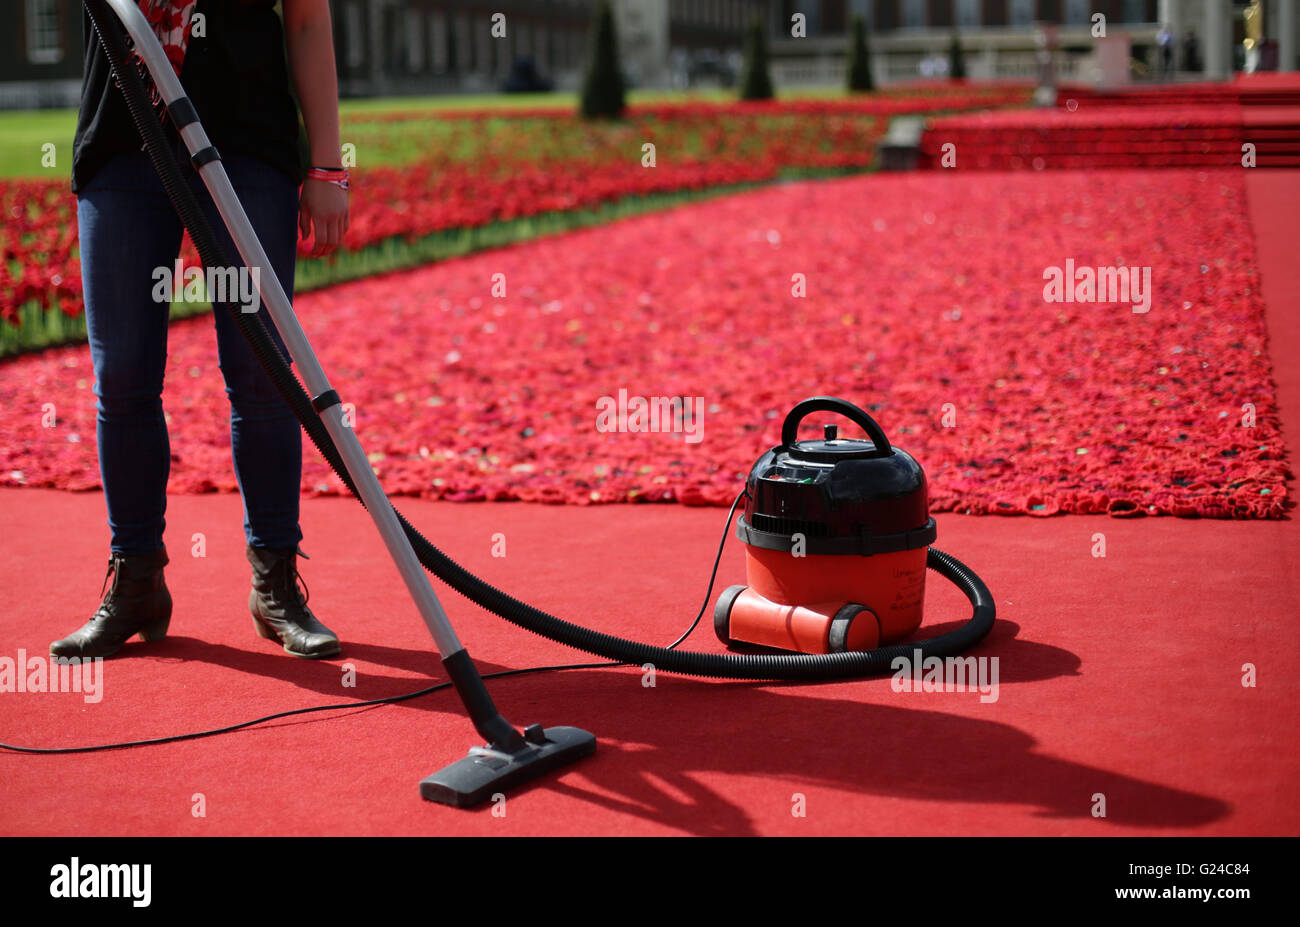 A Henry vacuum cleaner is used to clean the carpet of the 5000 Poppies exhibit - which uses almost 300,000 individually crocheted poppies, covering nearly 2,000sq m (21,000sq ft) in the grounds of the Royal Hospital Chelsea - ahead of the visit by the Royal family on the press day of the Chelsea Flower Show, Royal Hospital Chelsea, London. Stock Photo